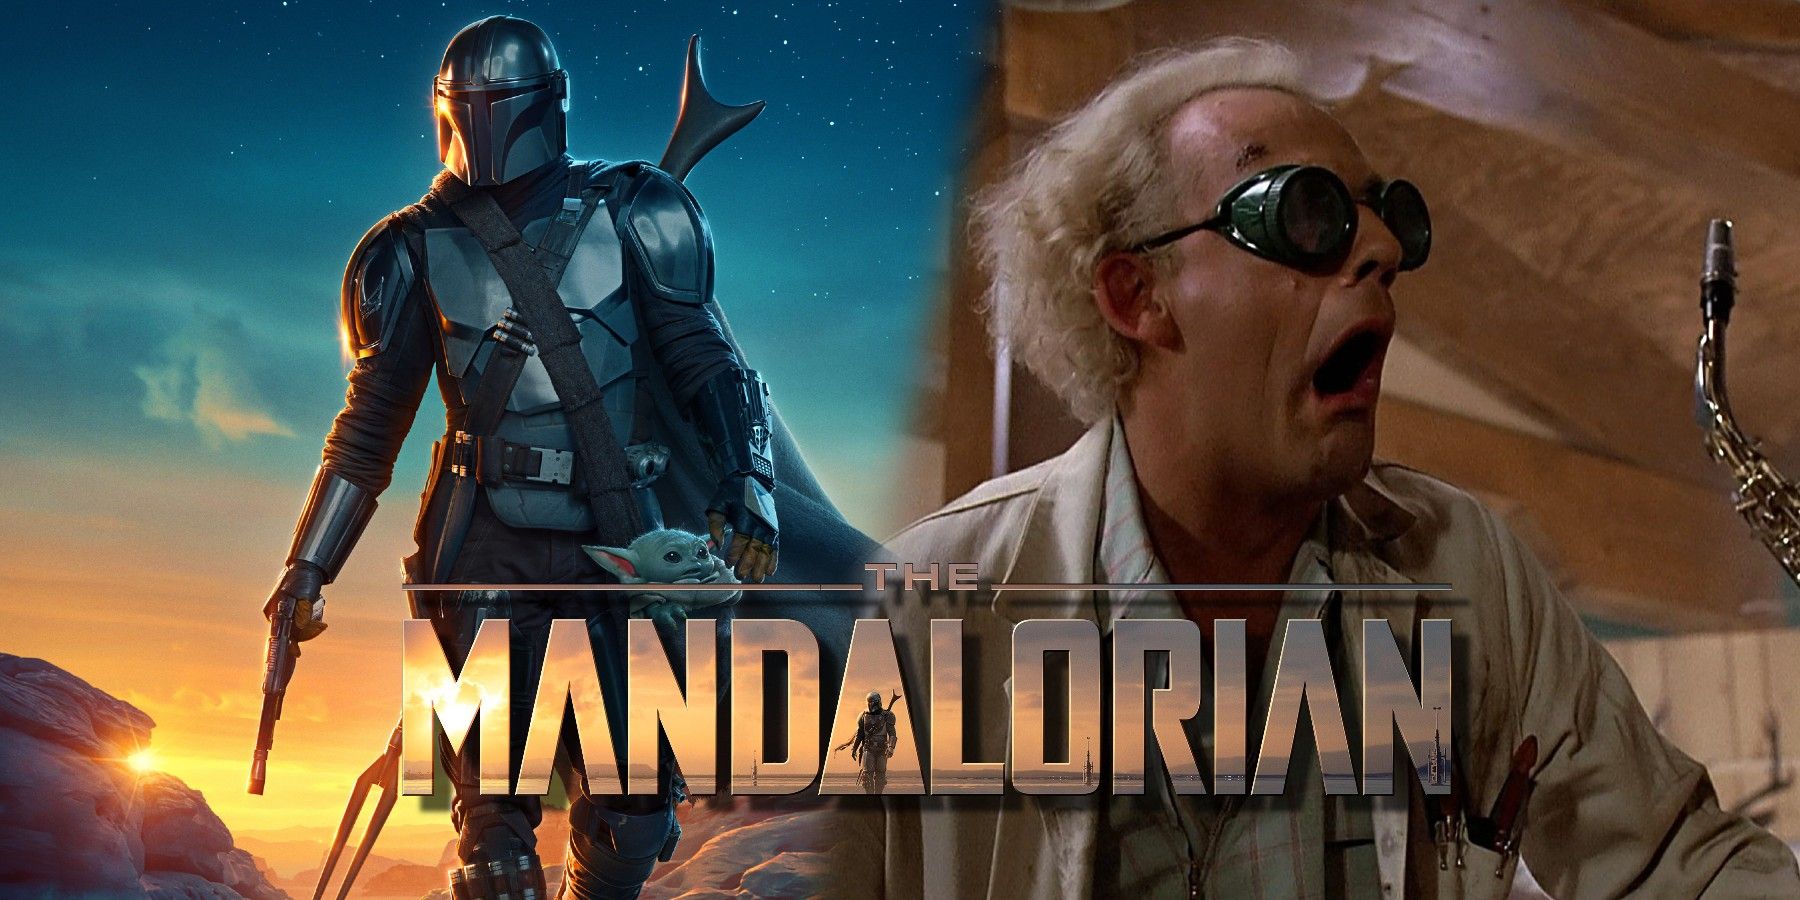 The Mandalorian Season 3 Casts Christopher Lloyd as Special Guest